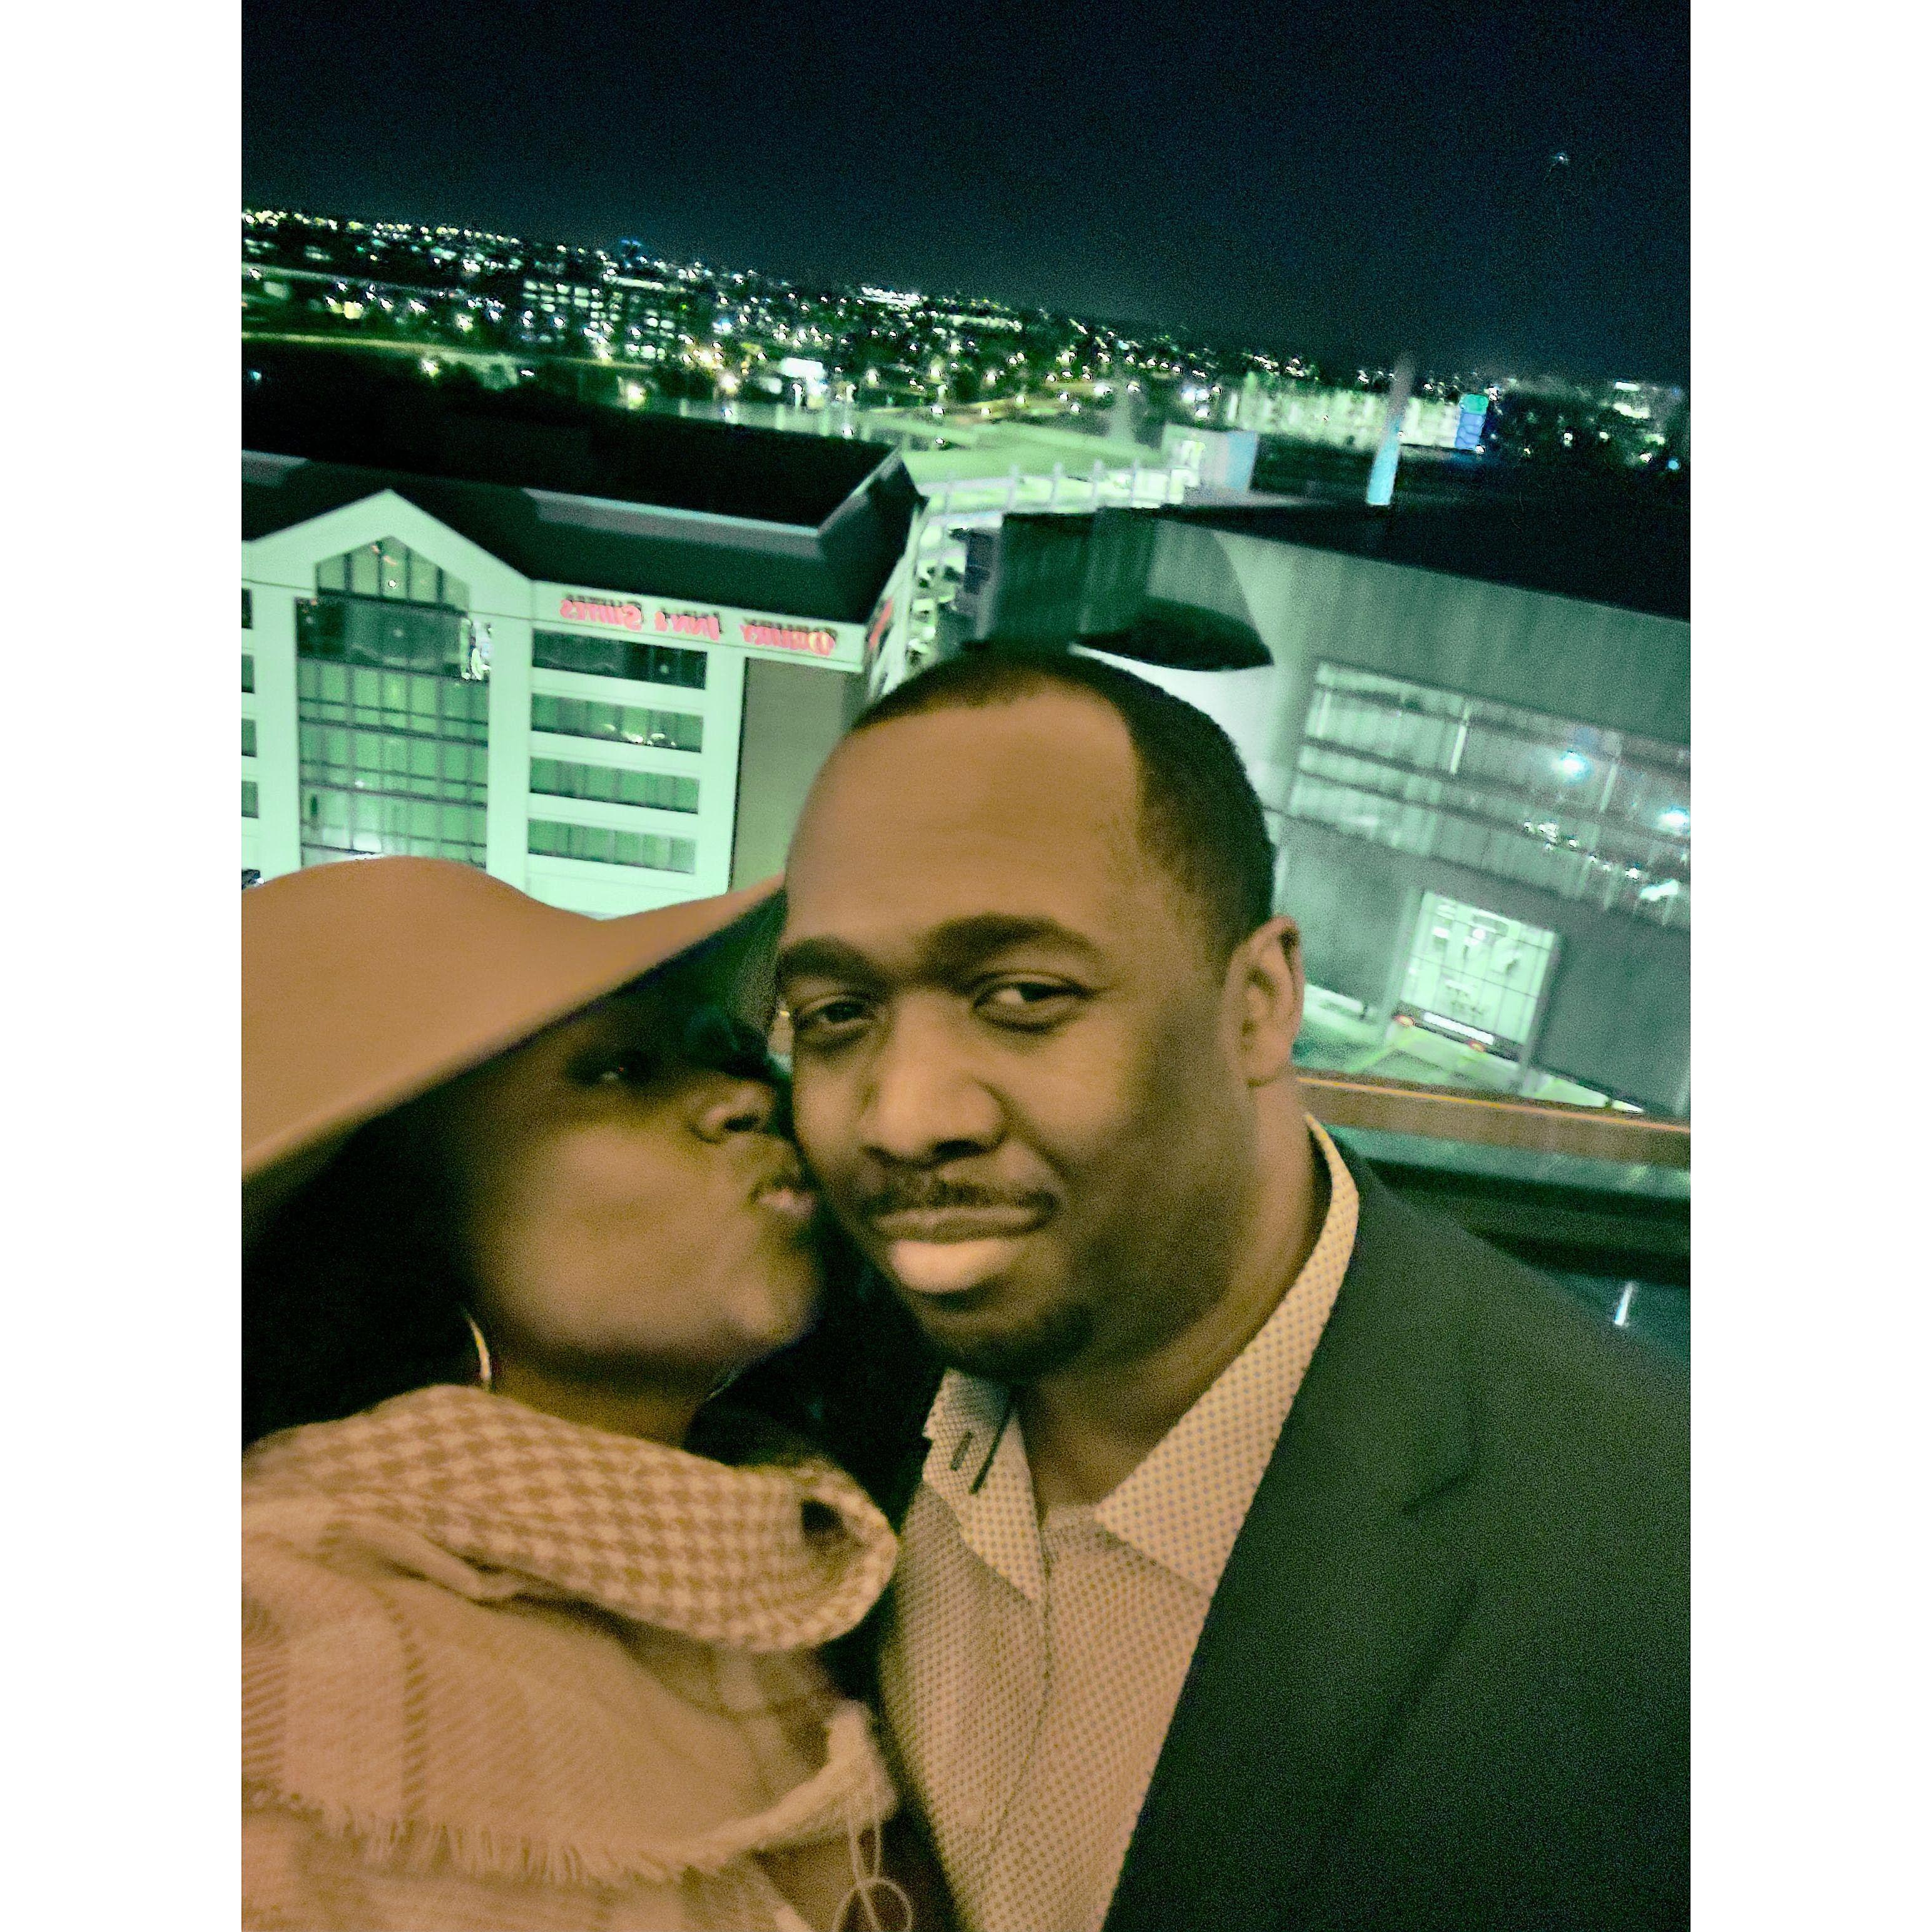 February 11, 2023 Rooftop Engagement - The day I said "Yes"